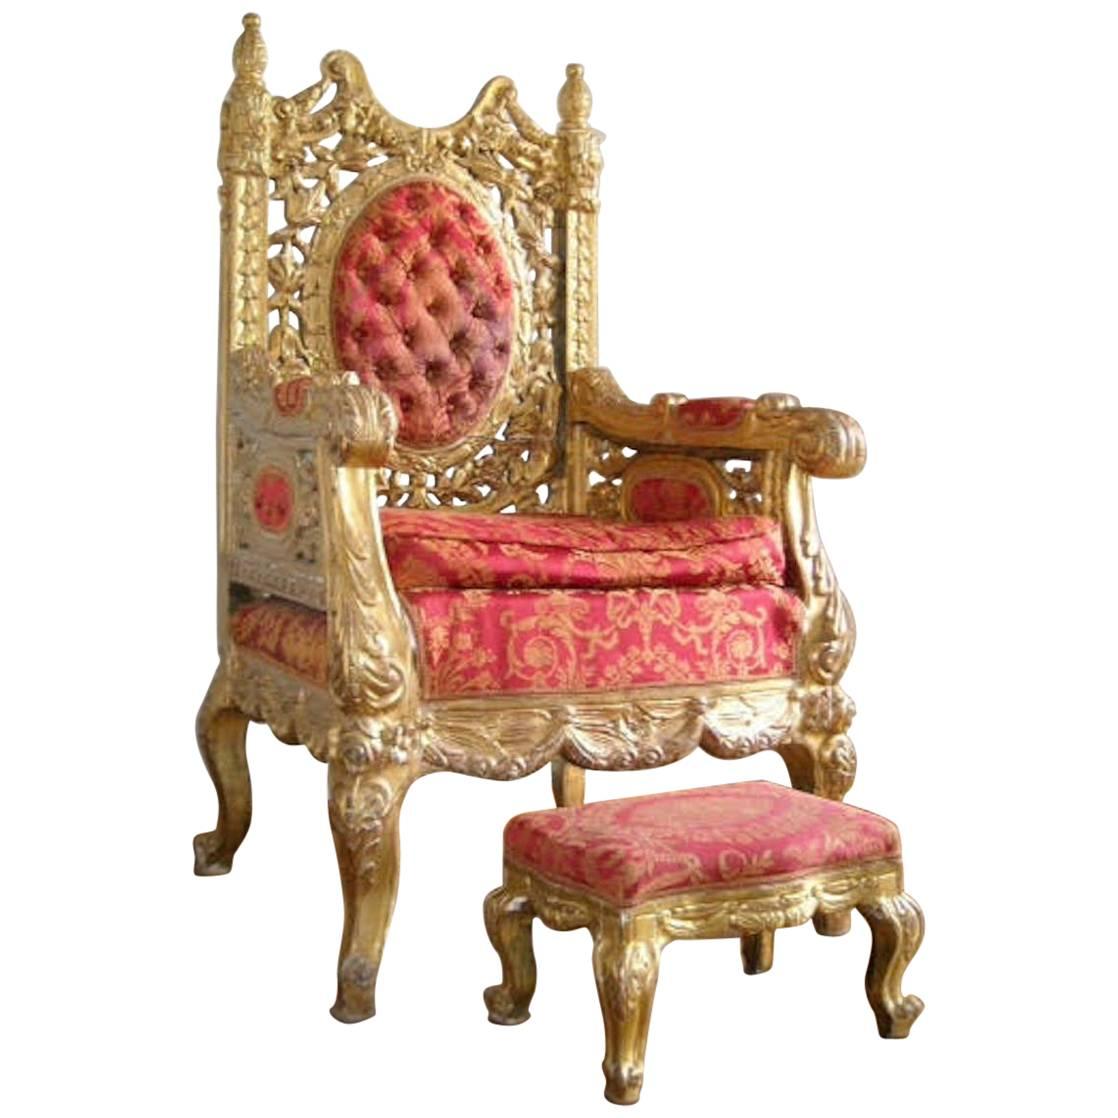 Throne 1850 Giltwood Royal Italian Provenance "Palais ..." with Expertise For Sale